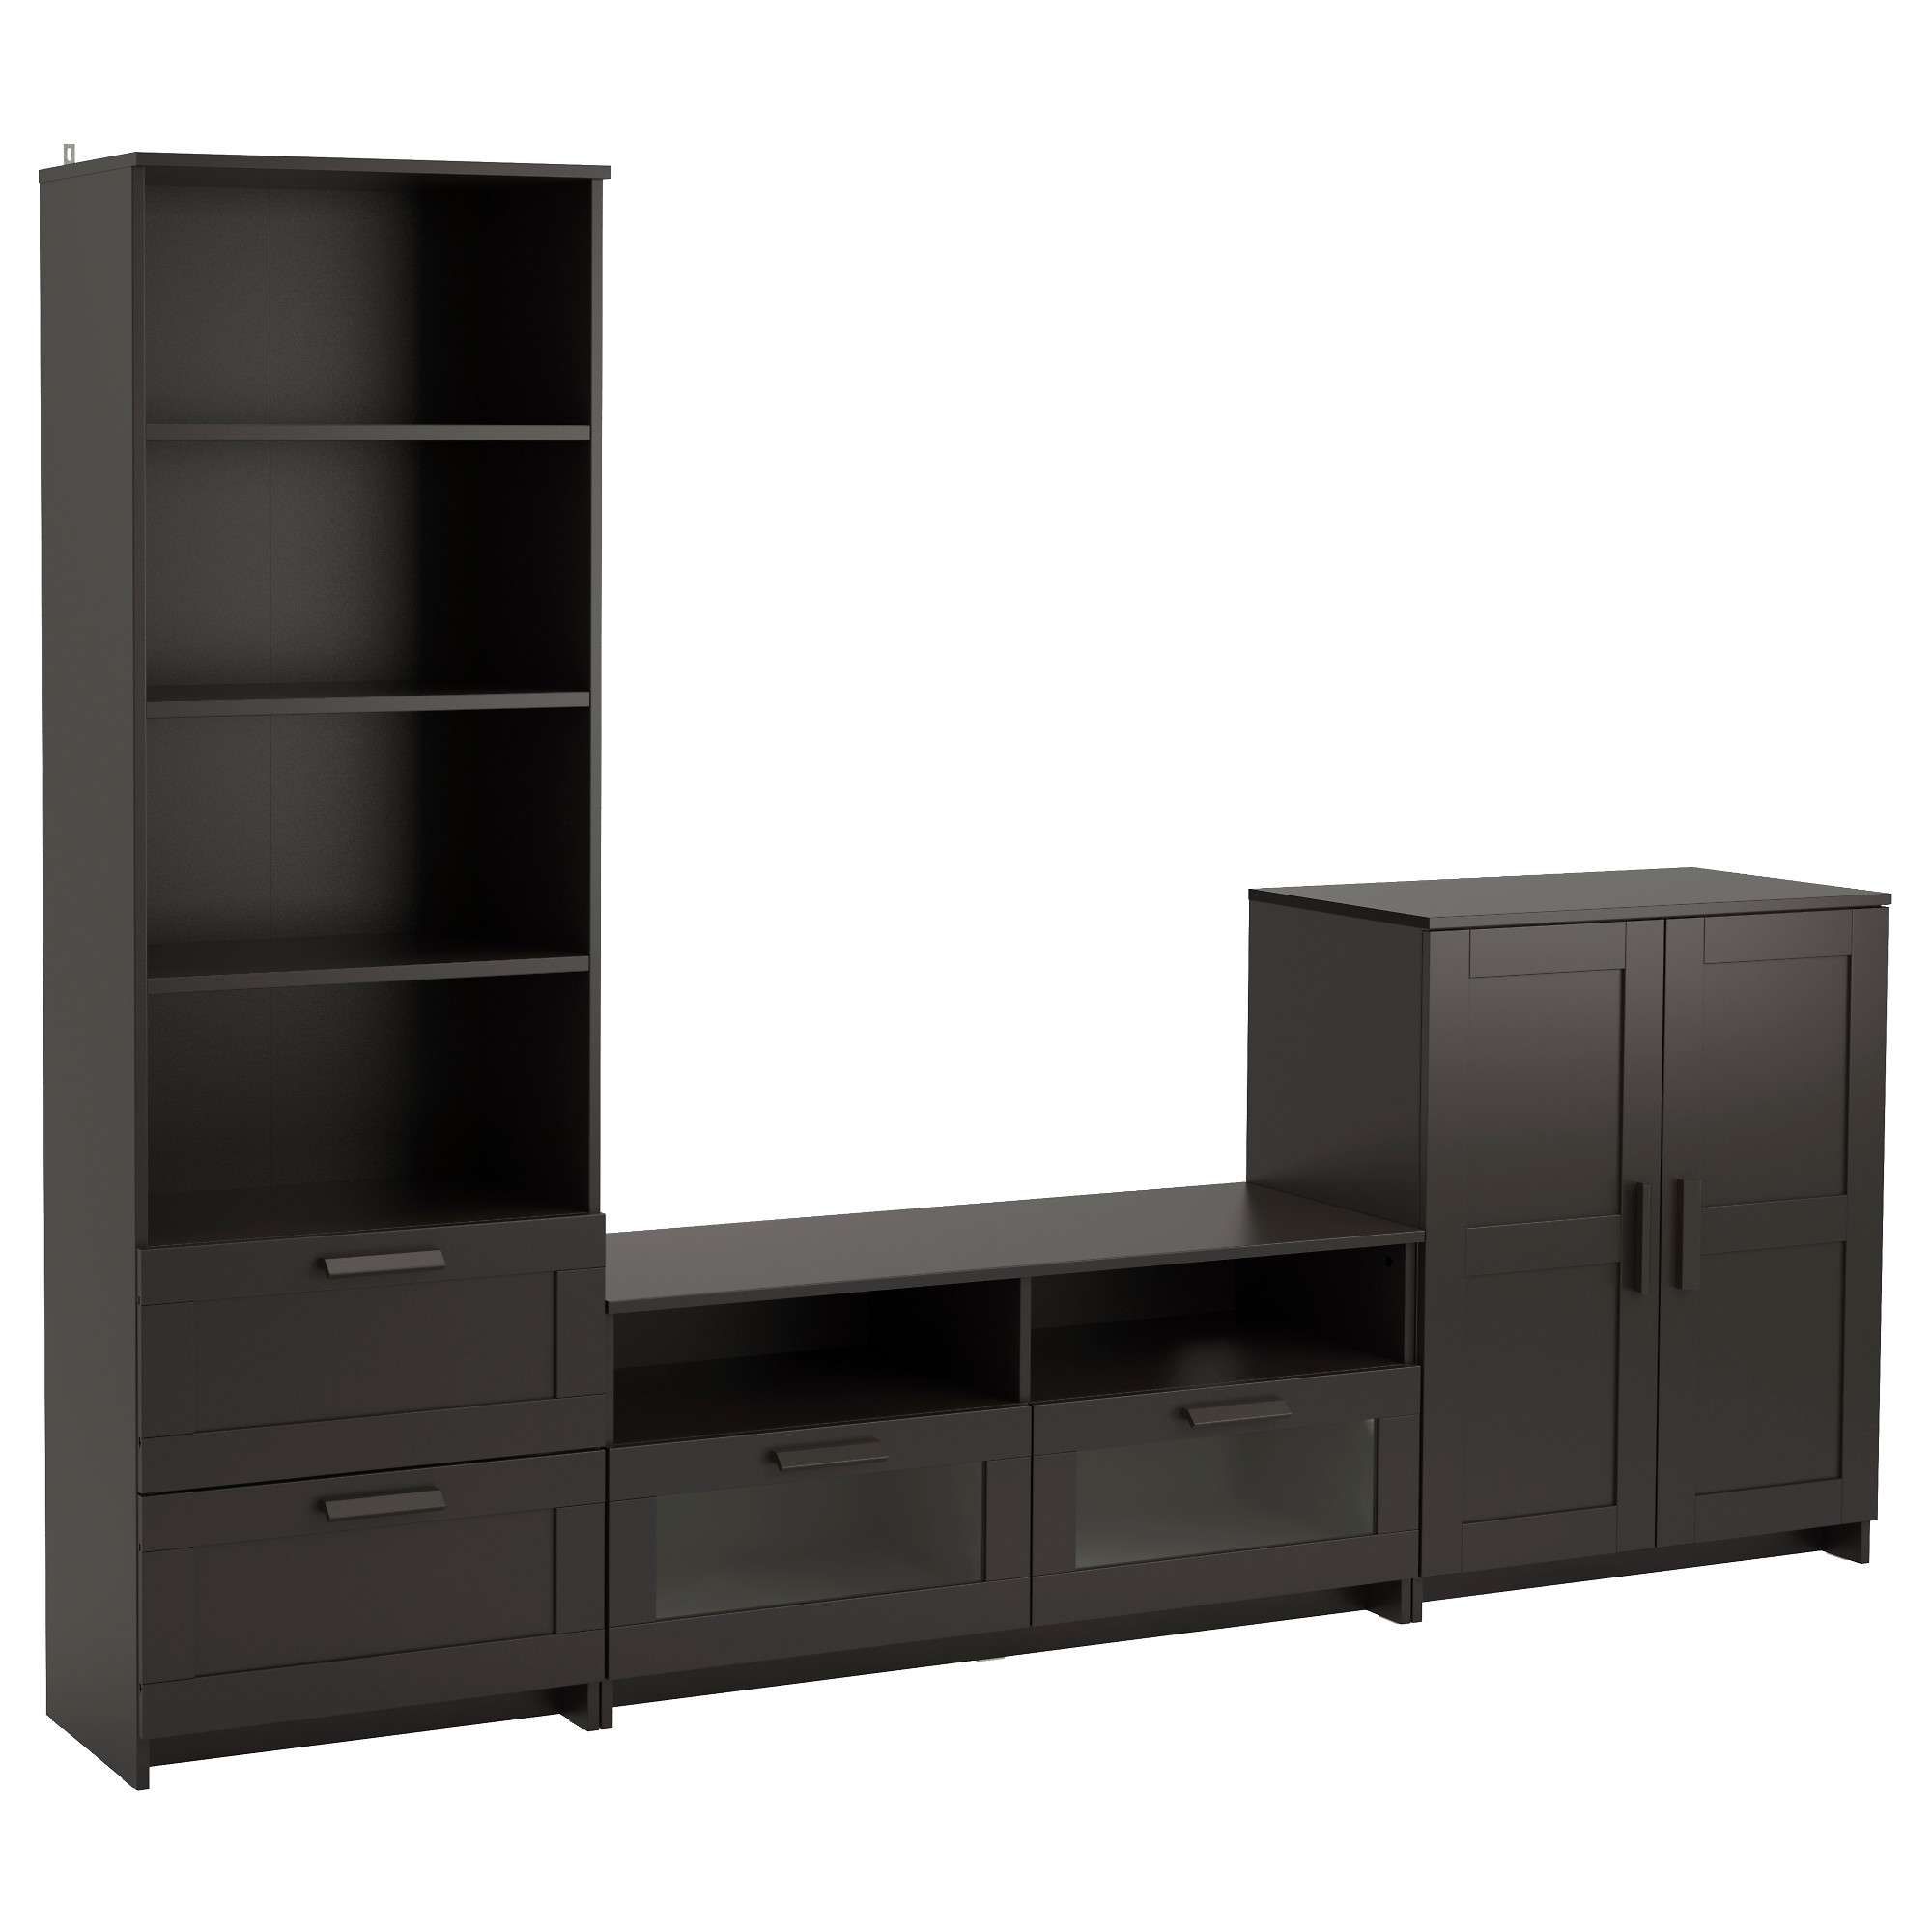 Tv Stands & Tv Units | Ikea Intended For Slimline Tv Cabinets (View 12 of 20)